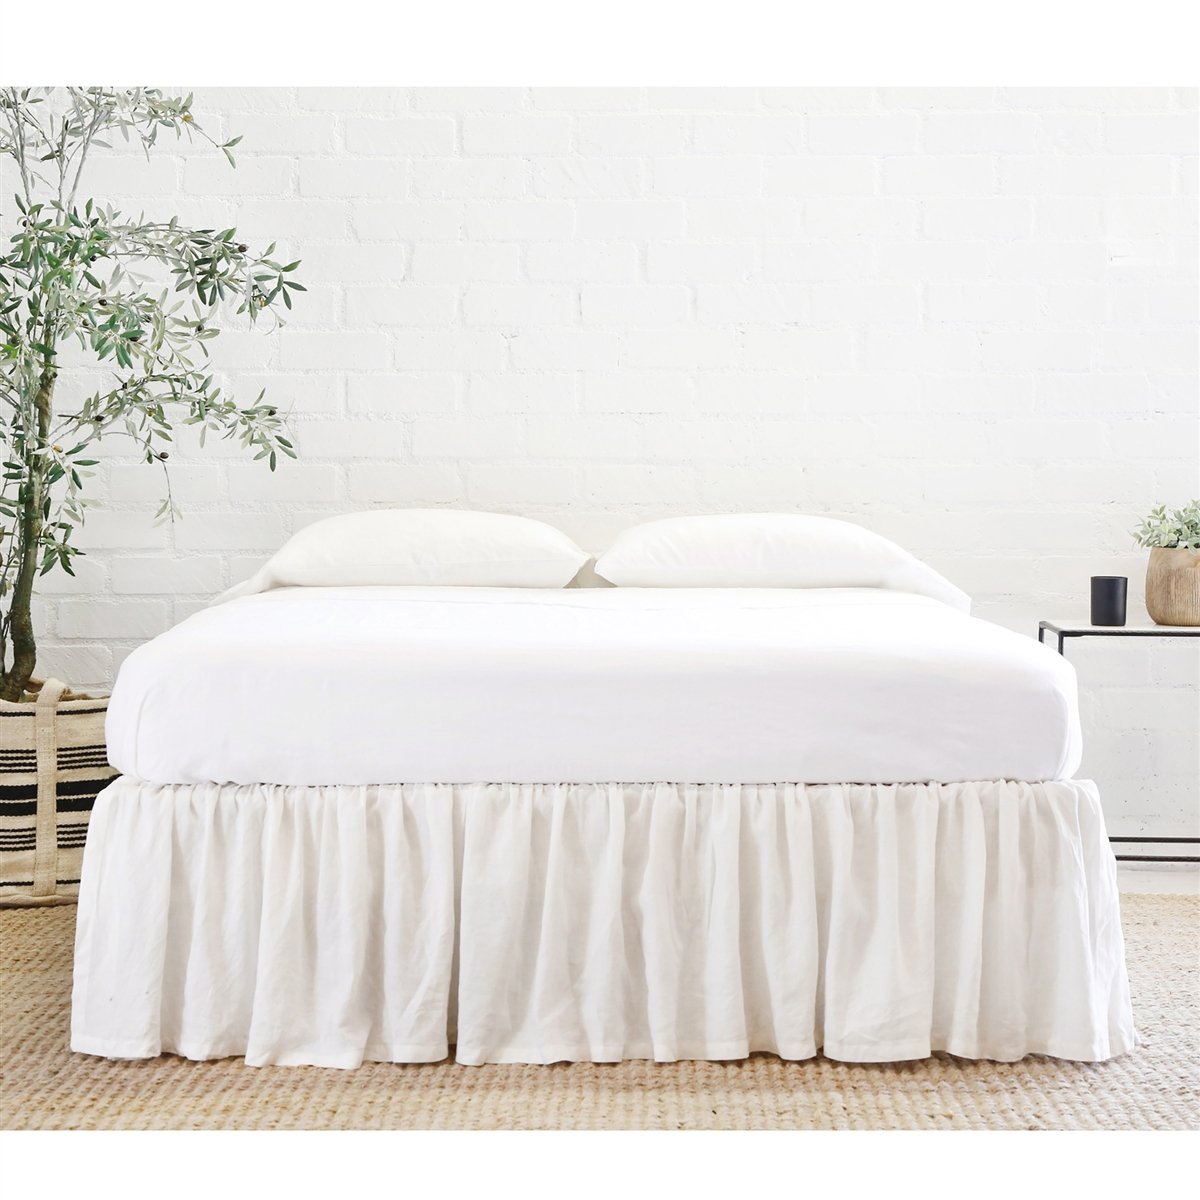 Gathered Linen Bed Skirt by Pom at Home